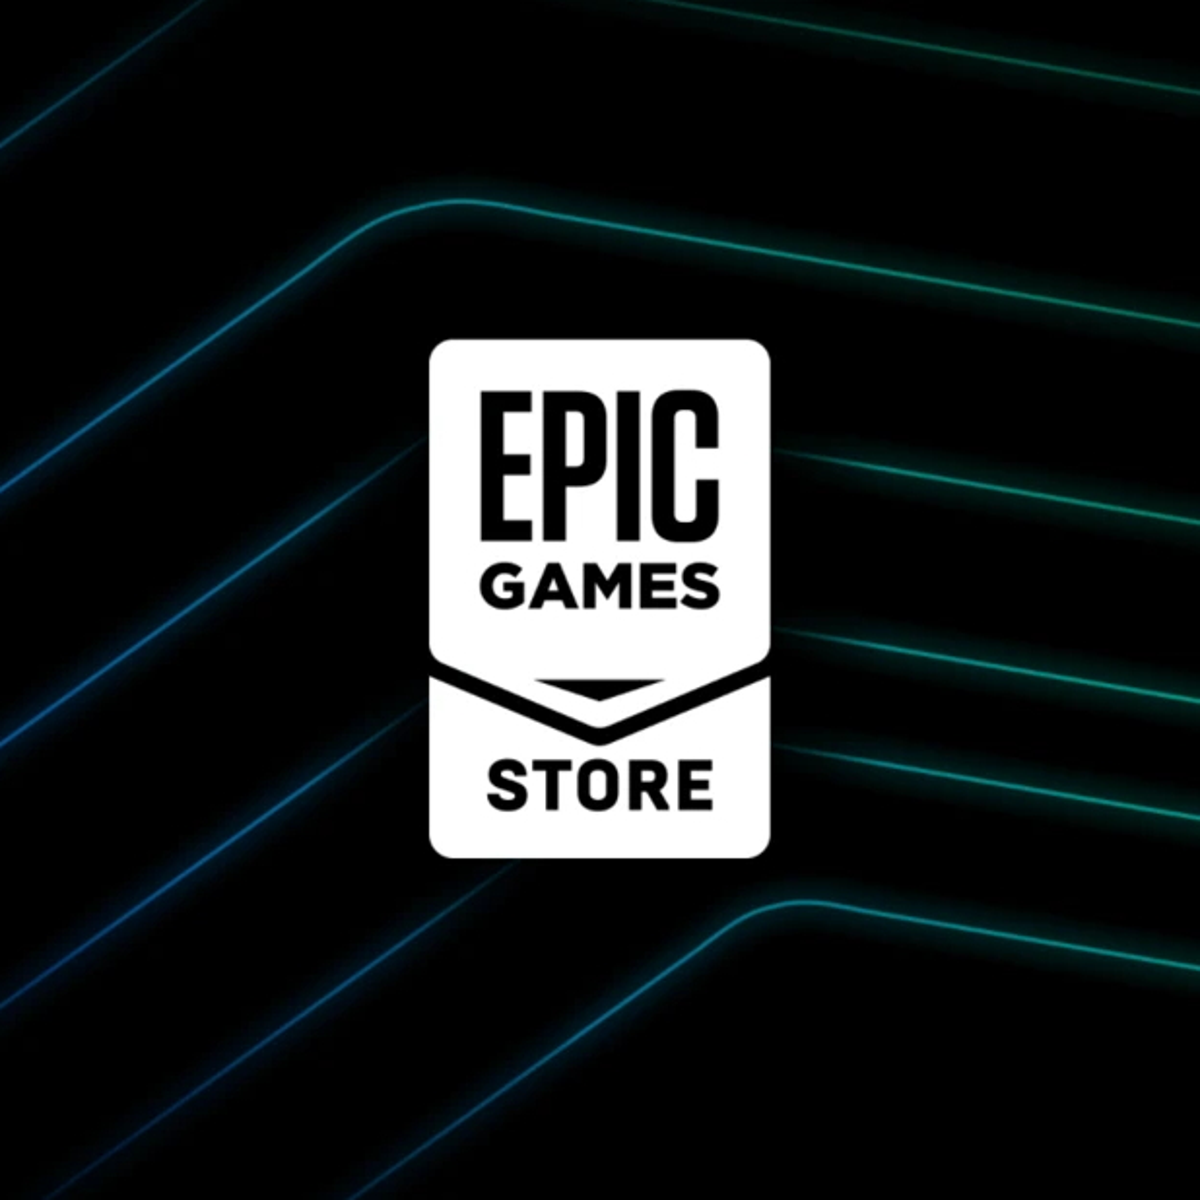 Epic Games has issued clarification regarding its expenditure on free titles